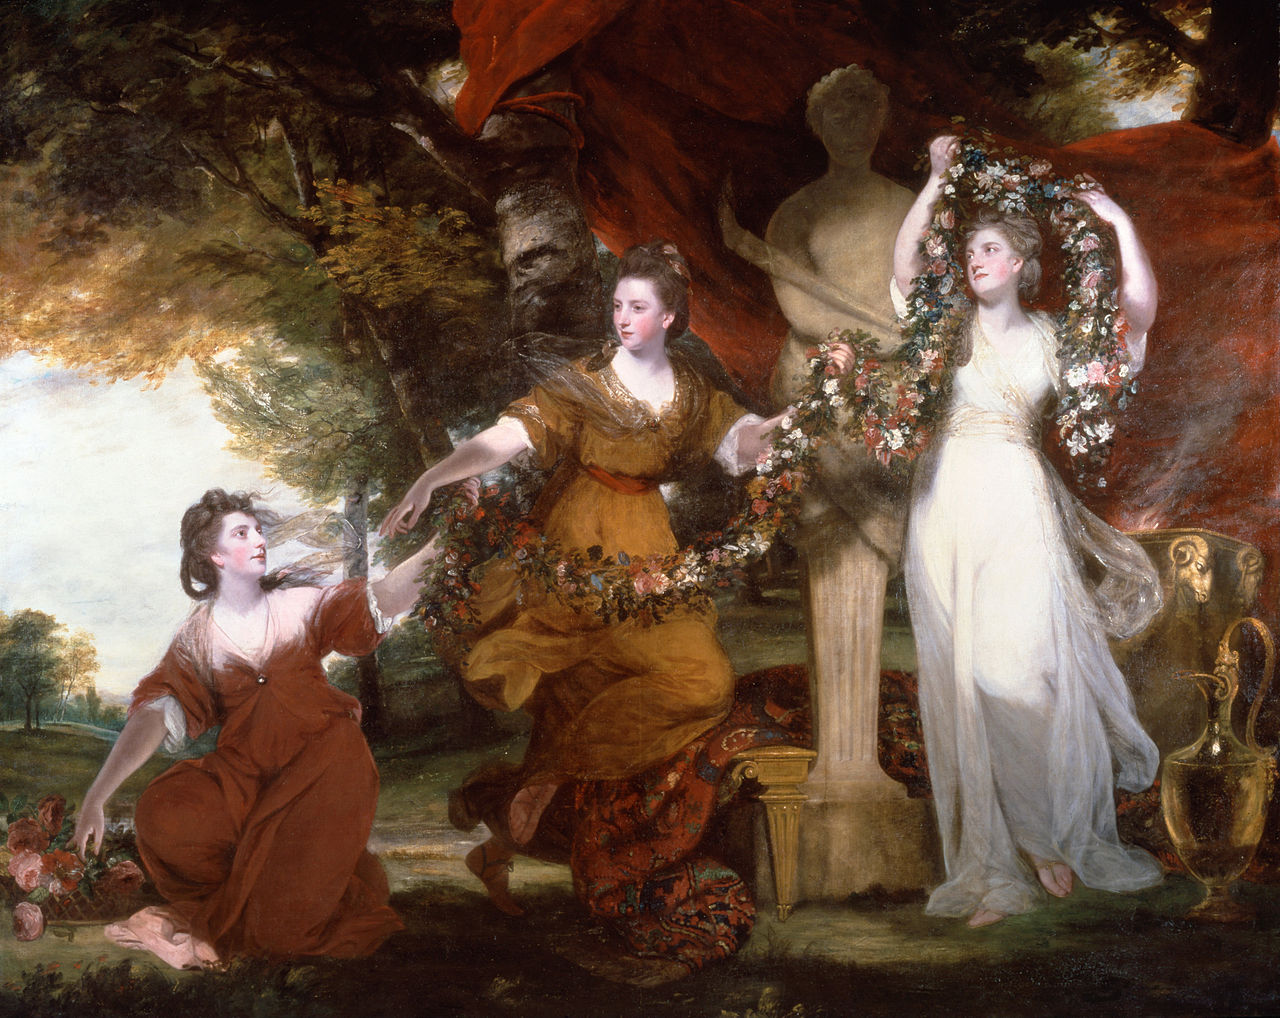 Three Ladies Adorning a Term of Hymen by Joshua Reynolds - 1773 - 233.7 x 290.8 cm private collection